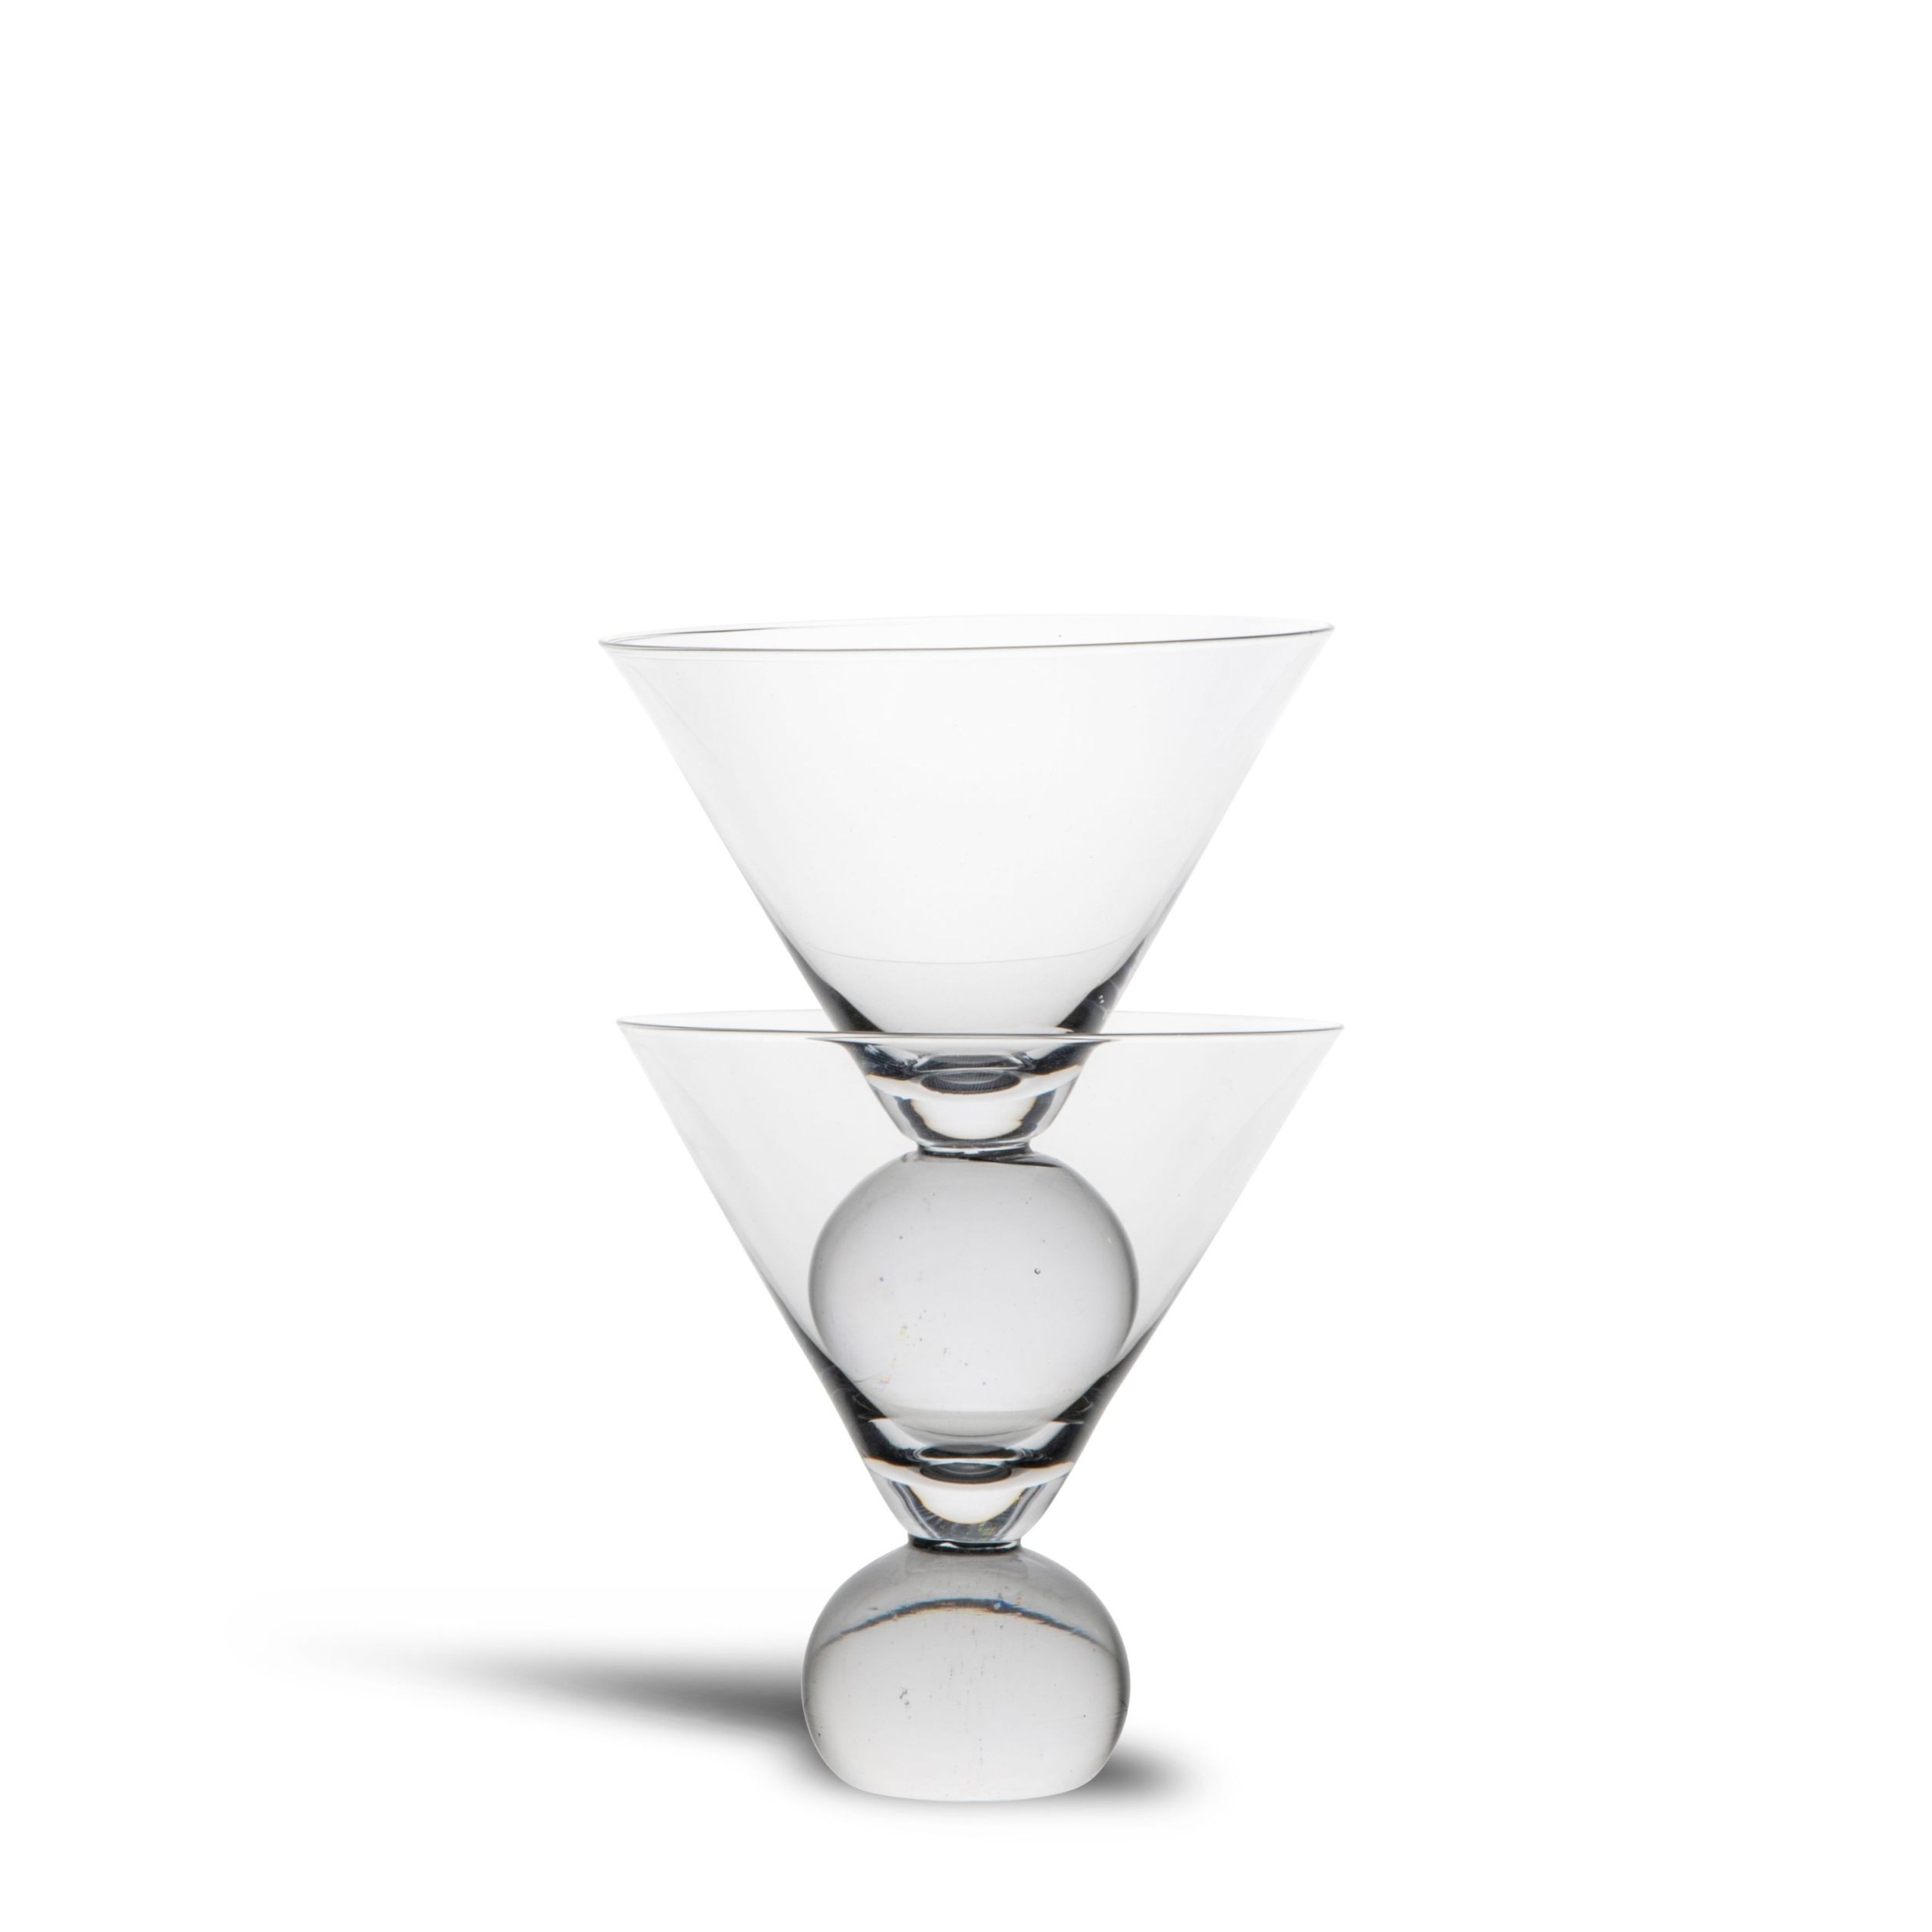 https://ak1.ostkcdn.com/images/products/is/images/direct/529588f84869d6bfe6fac28b53dfb05ab5c071bc/ByON-by-Widgeteer-Spice-Martini-Glasses%2C-Set-of-2.jpg